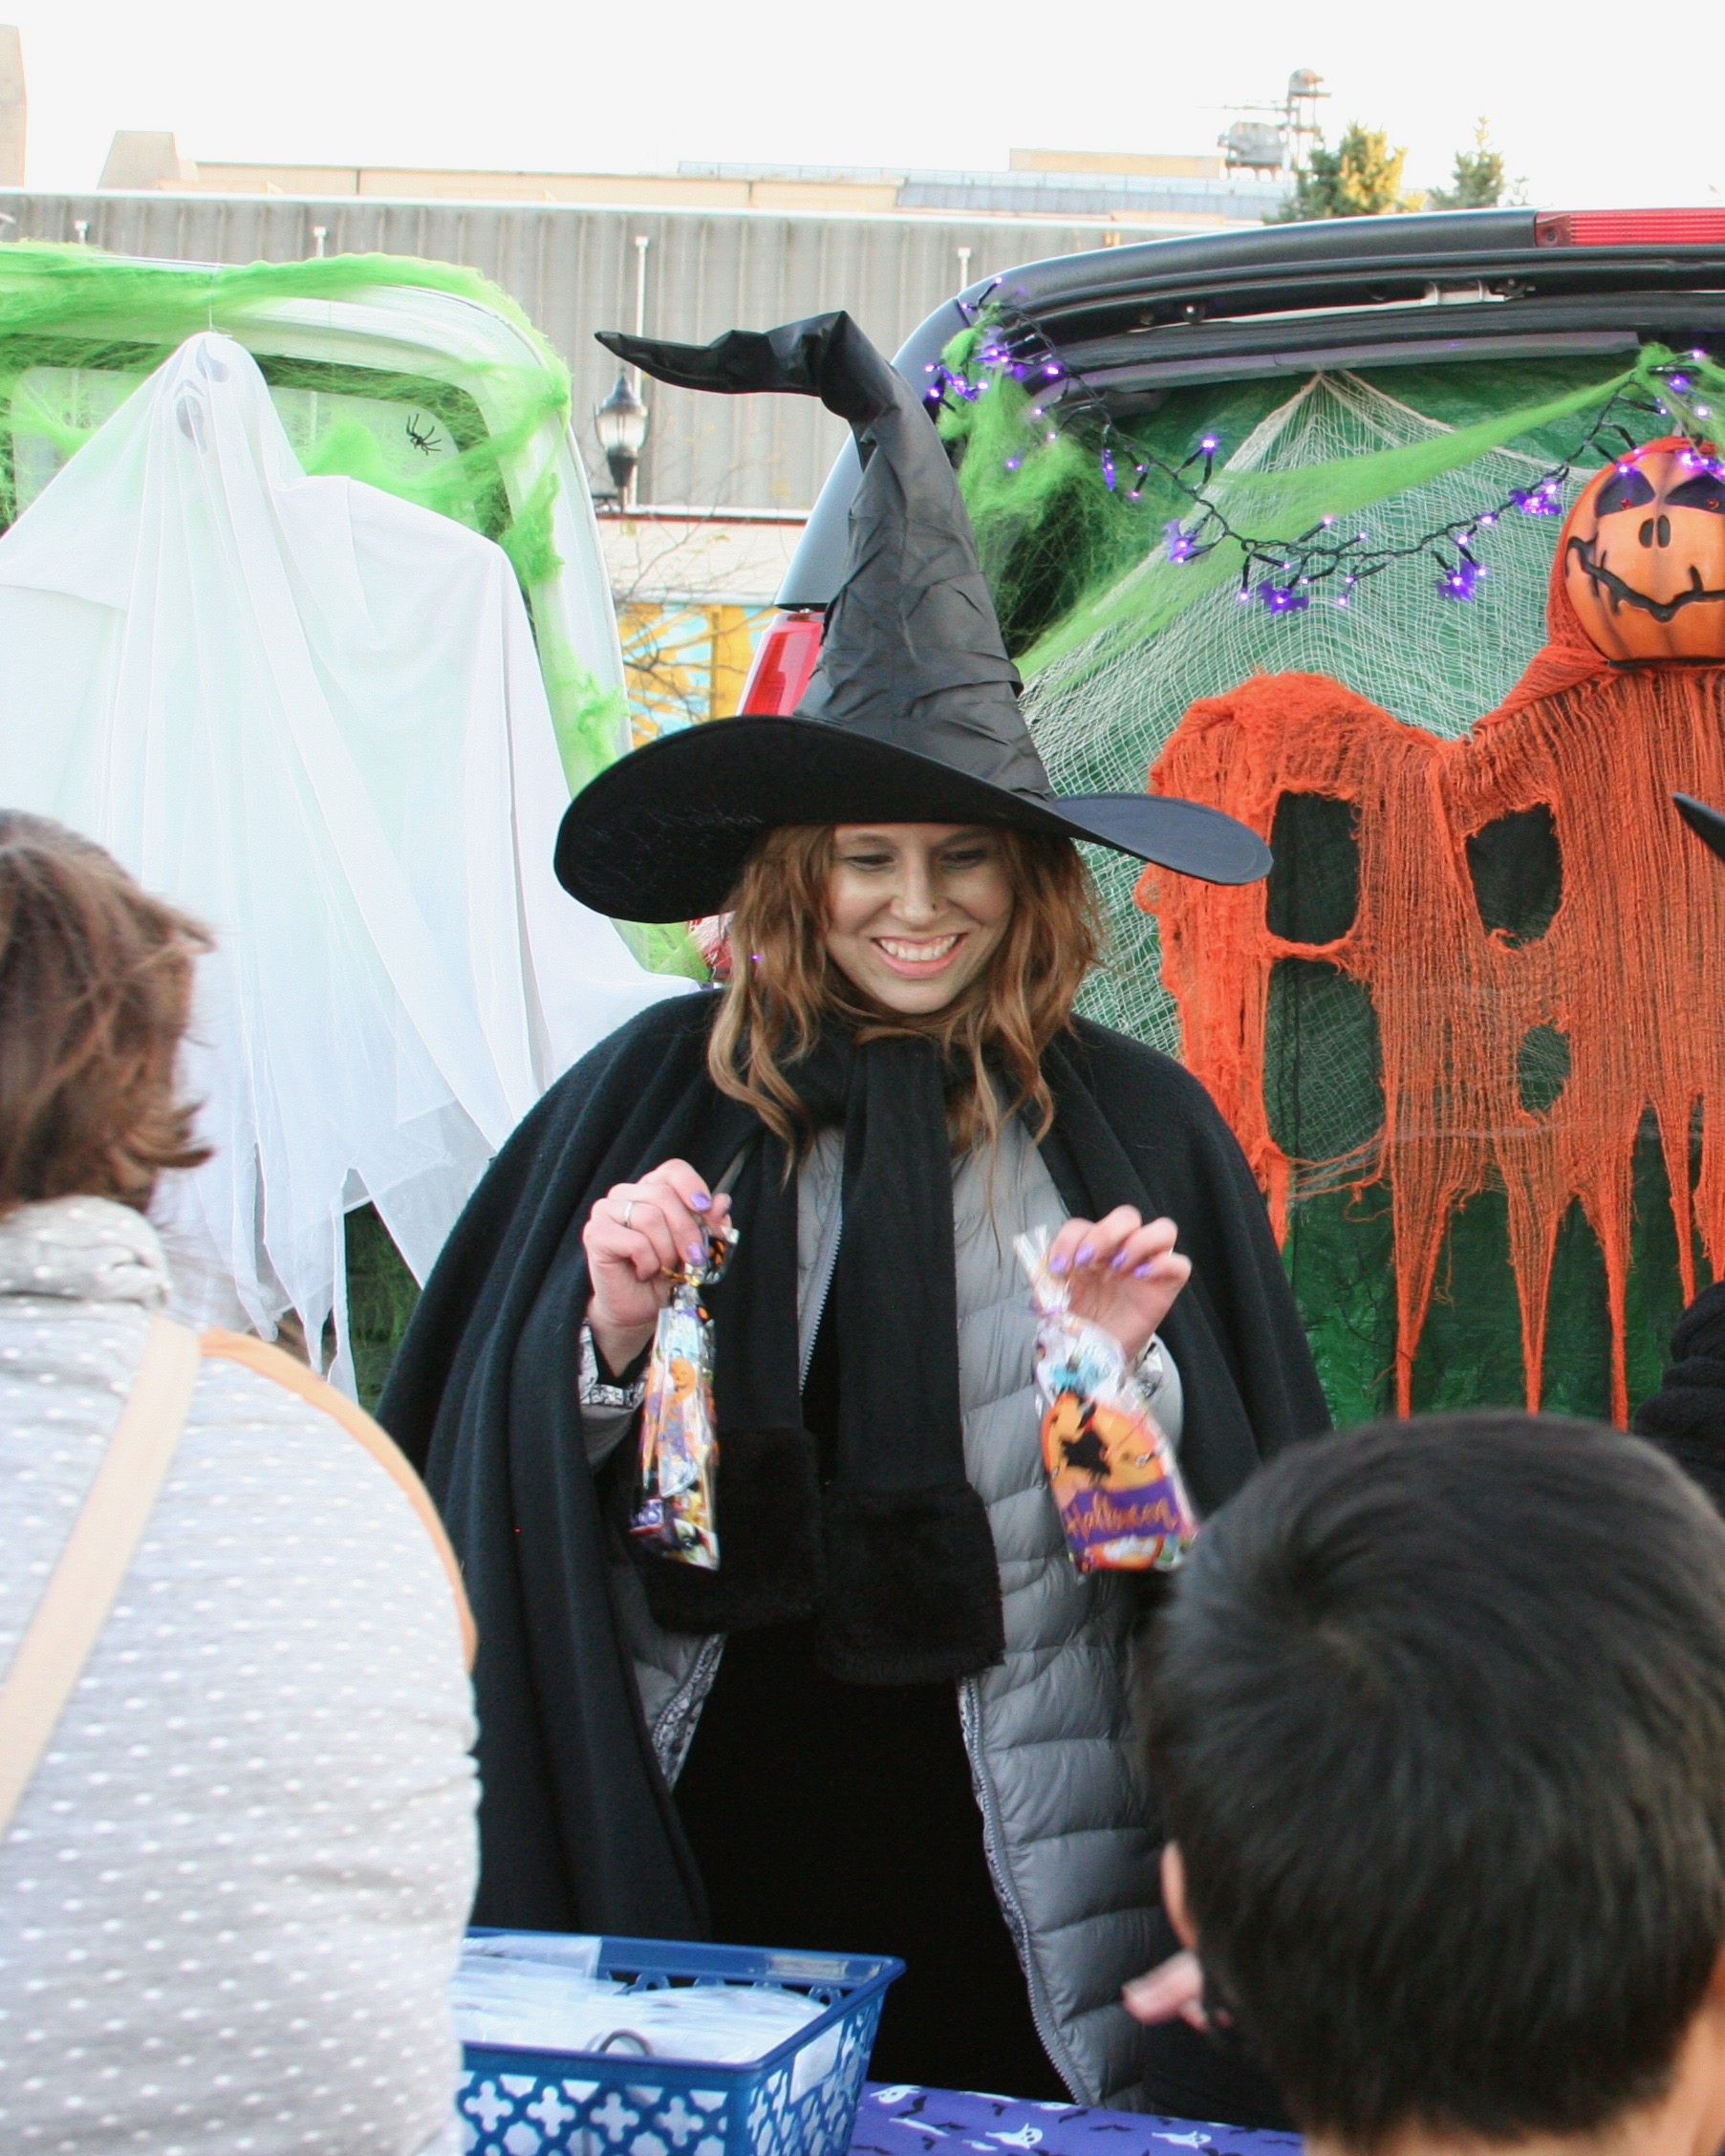 Woman dressed as witch handing out treats